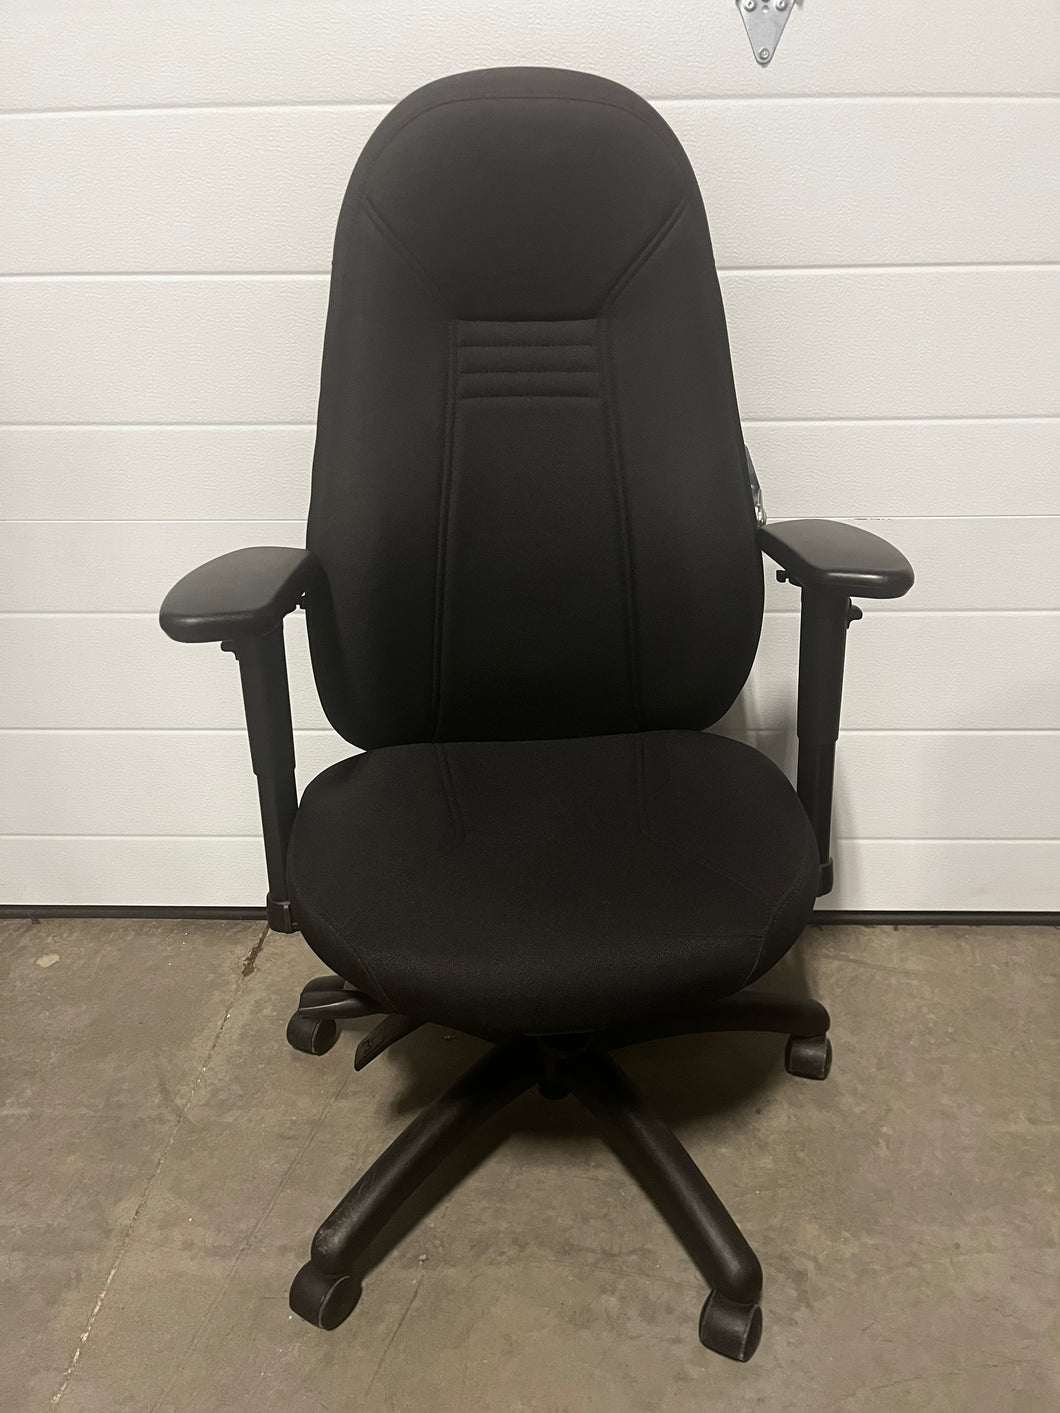 Used High Back Comfort Chair, Leather, Black, 300 lbs. Capacity